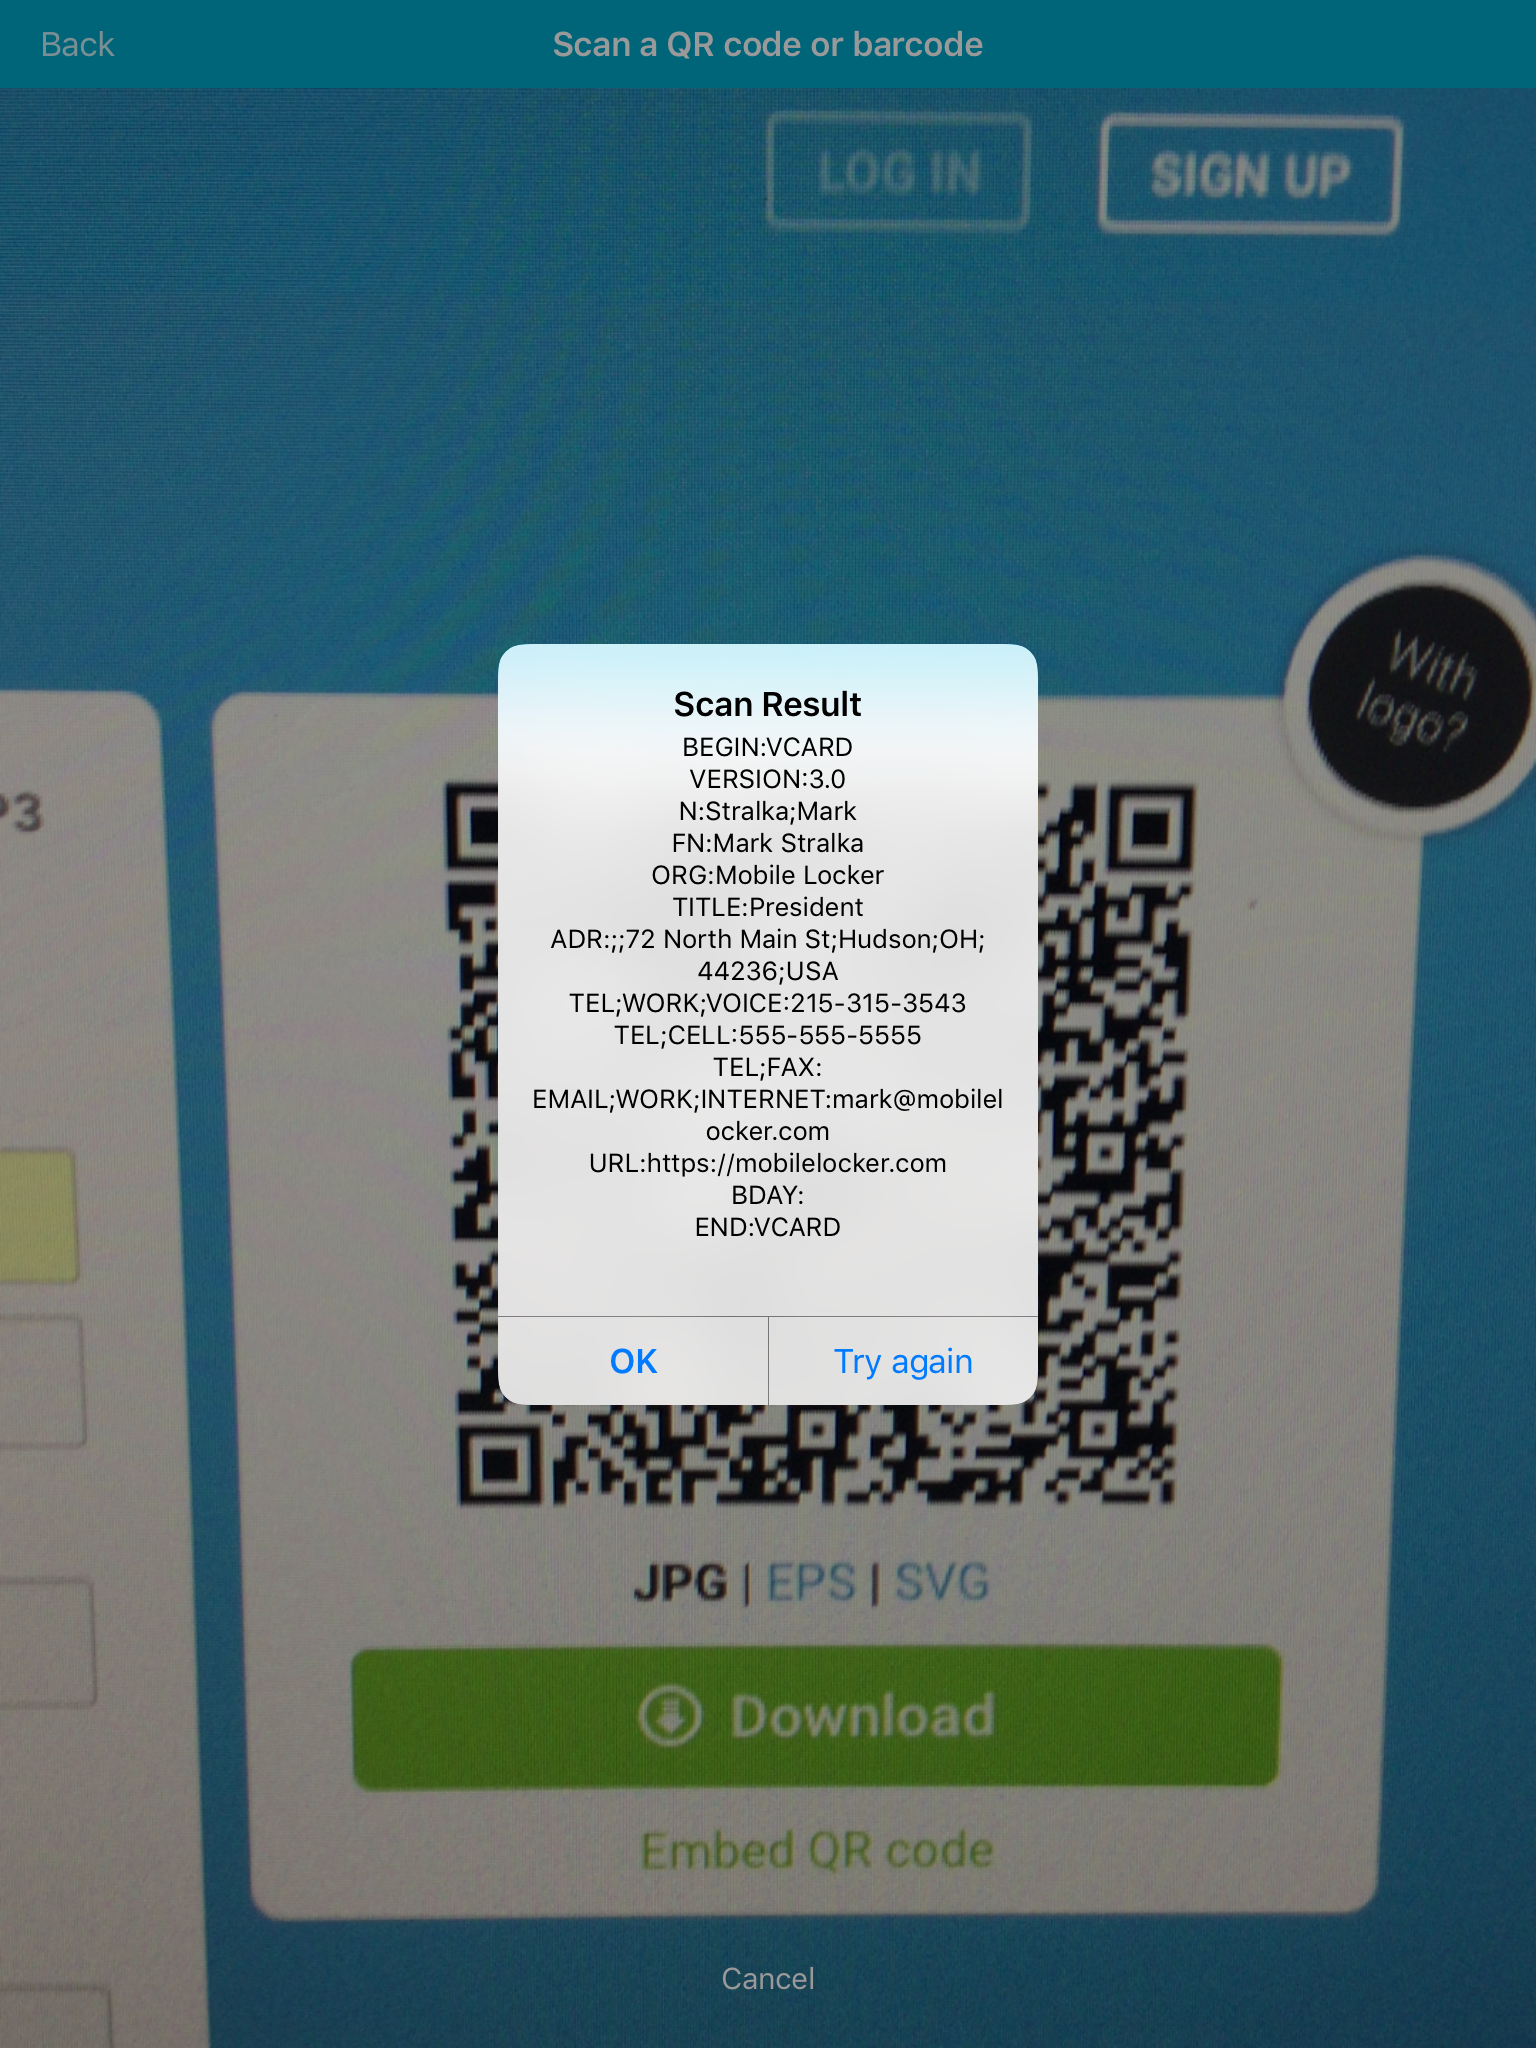 The raw data contained within the QR code.  It was a VCARD in this example but it could be anything that can be represented in a QR or barcode.  See [barcode-generator.org](http://www.barcode-generator.org/)